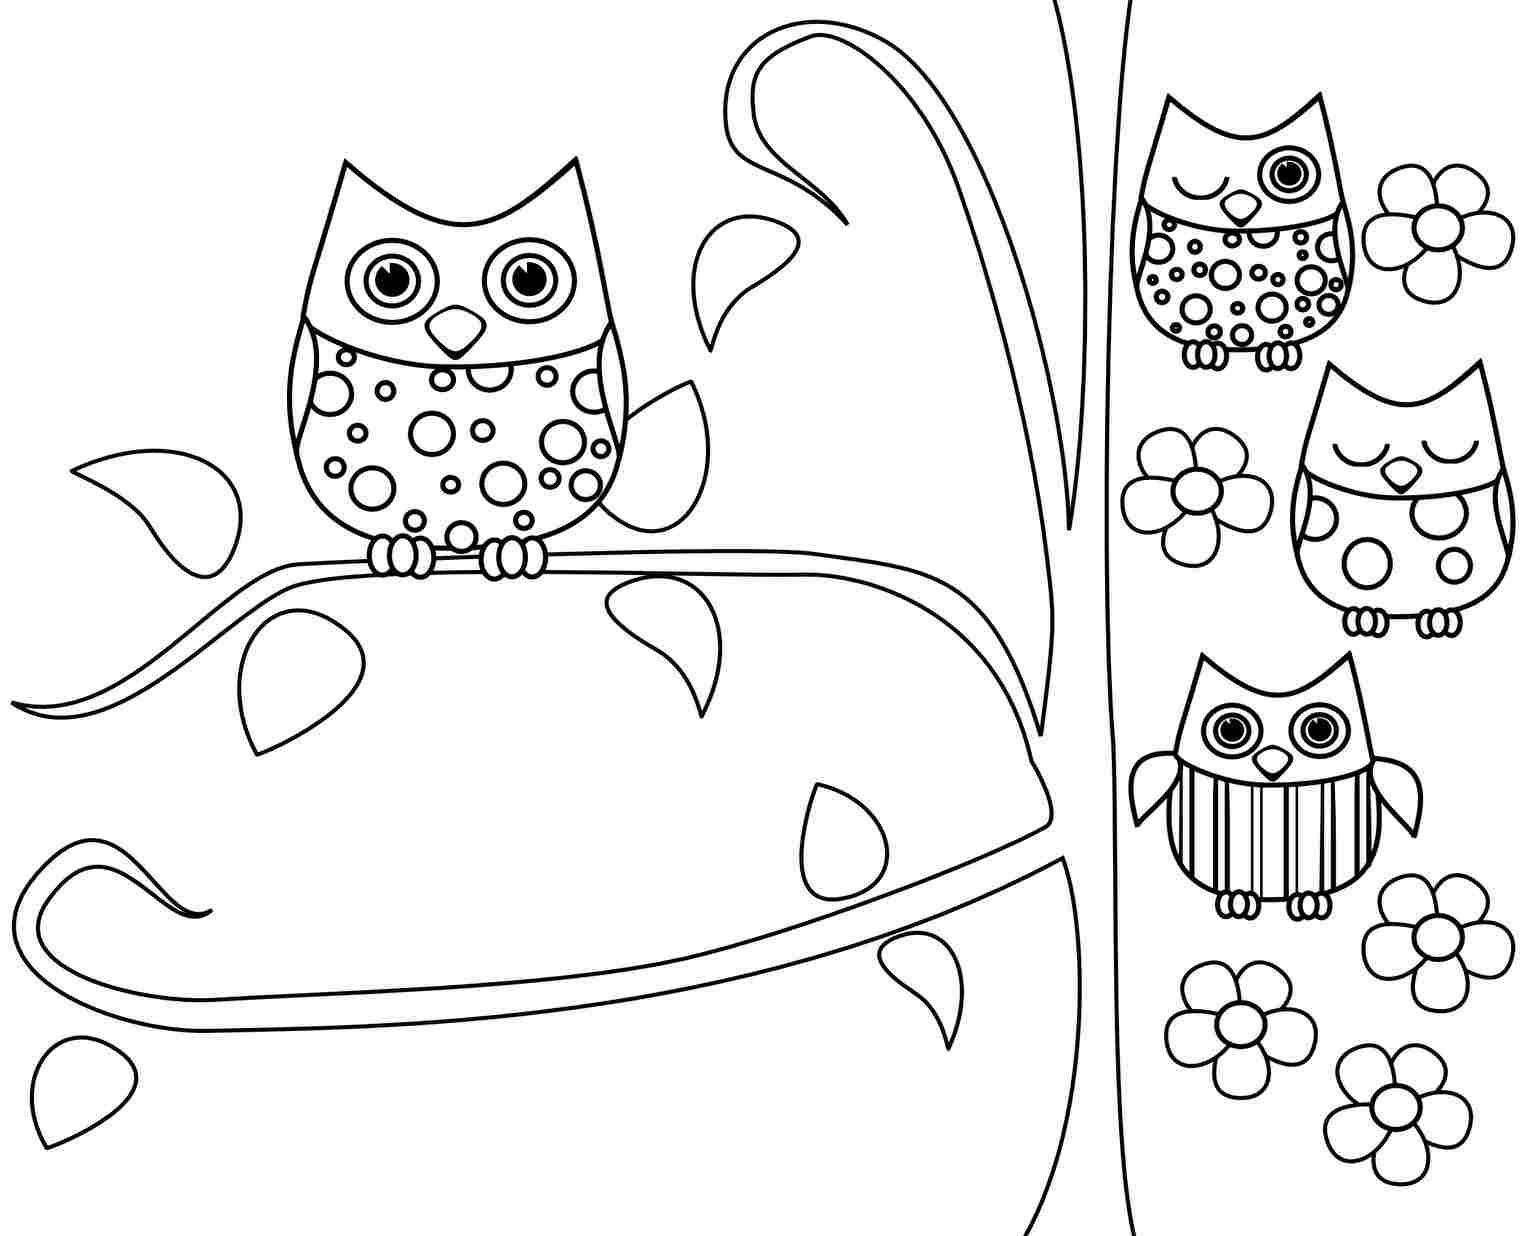 Owl Coloring Pages | Work And Play | Pinterest | Owl Coloring Pages - Free Printable Owl Coloring Sheets